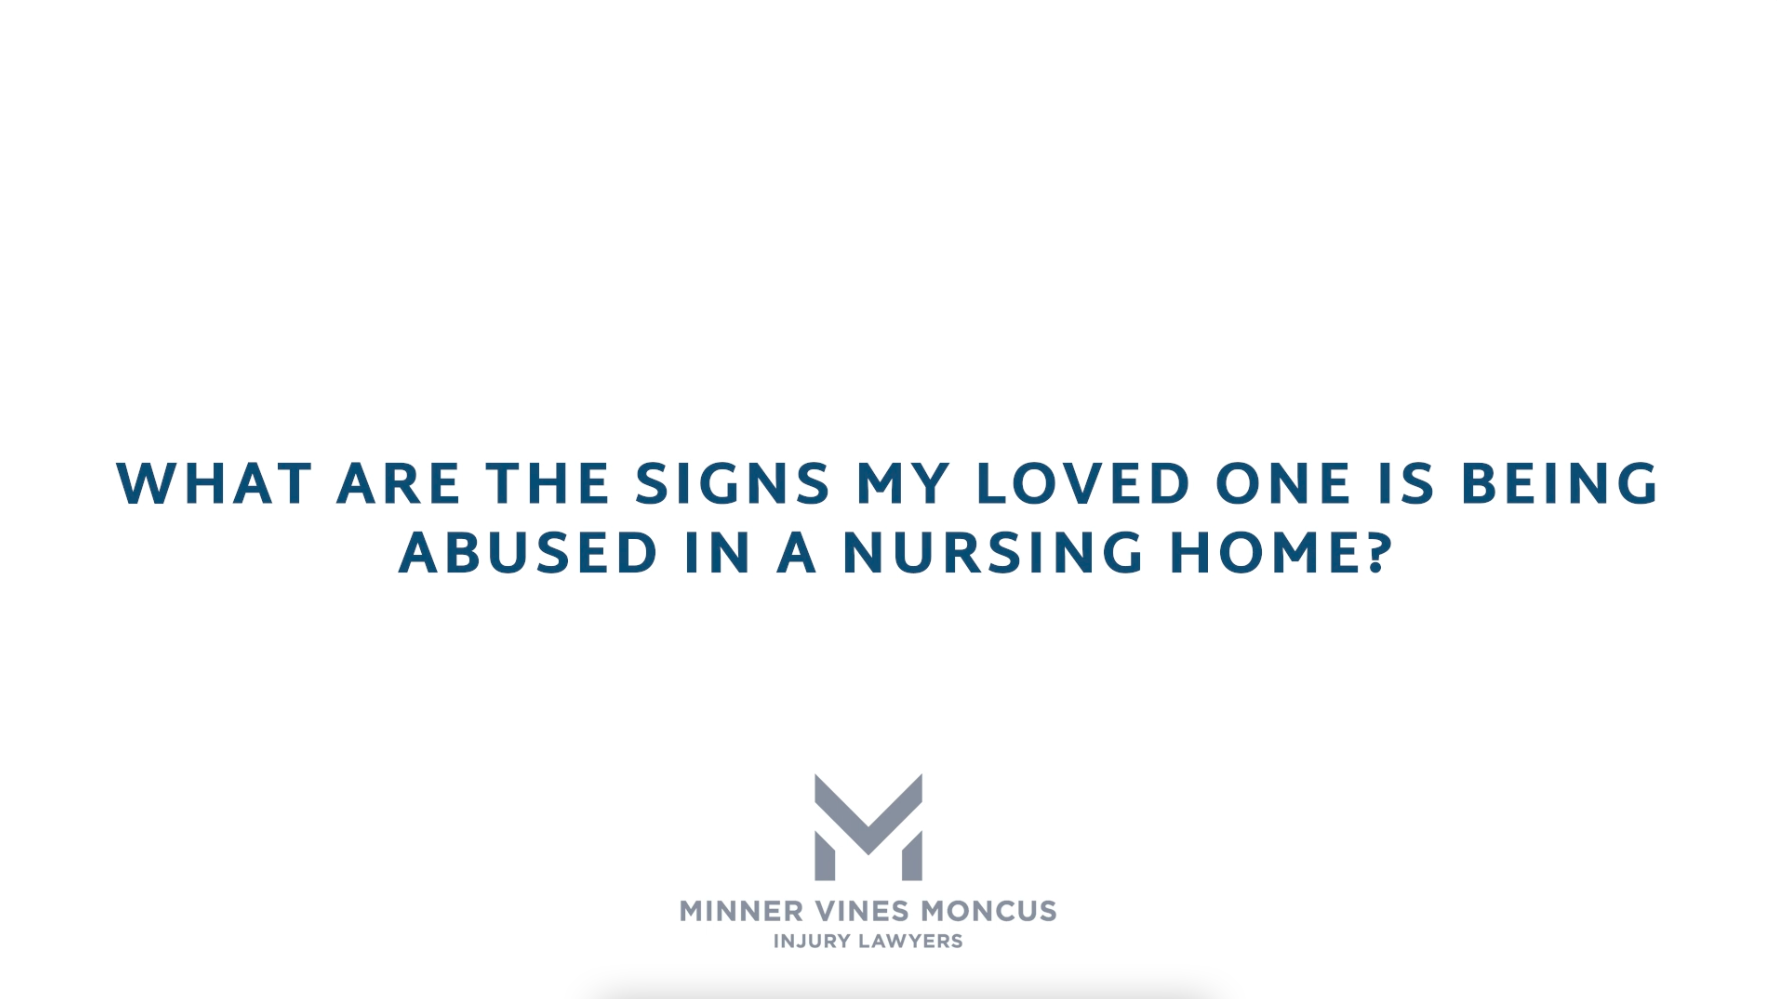 What are the signs my loved one is being abused in a nursing home?